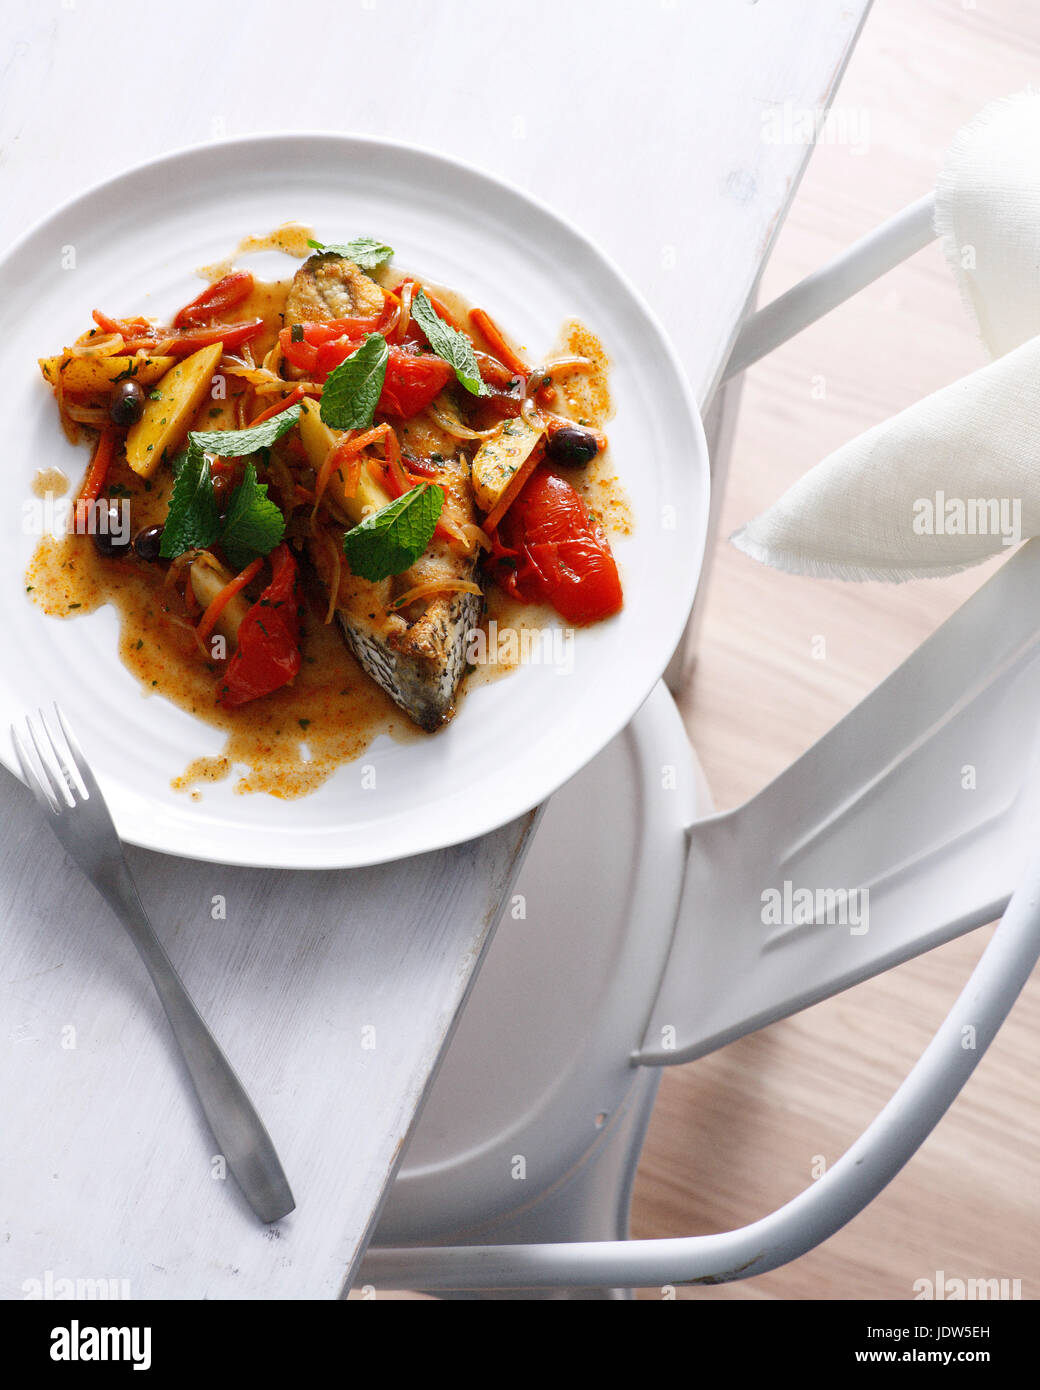 Fish tagine with vegetables and garnish Stock Photo